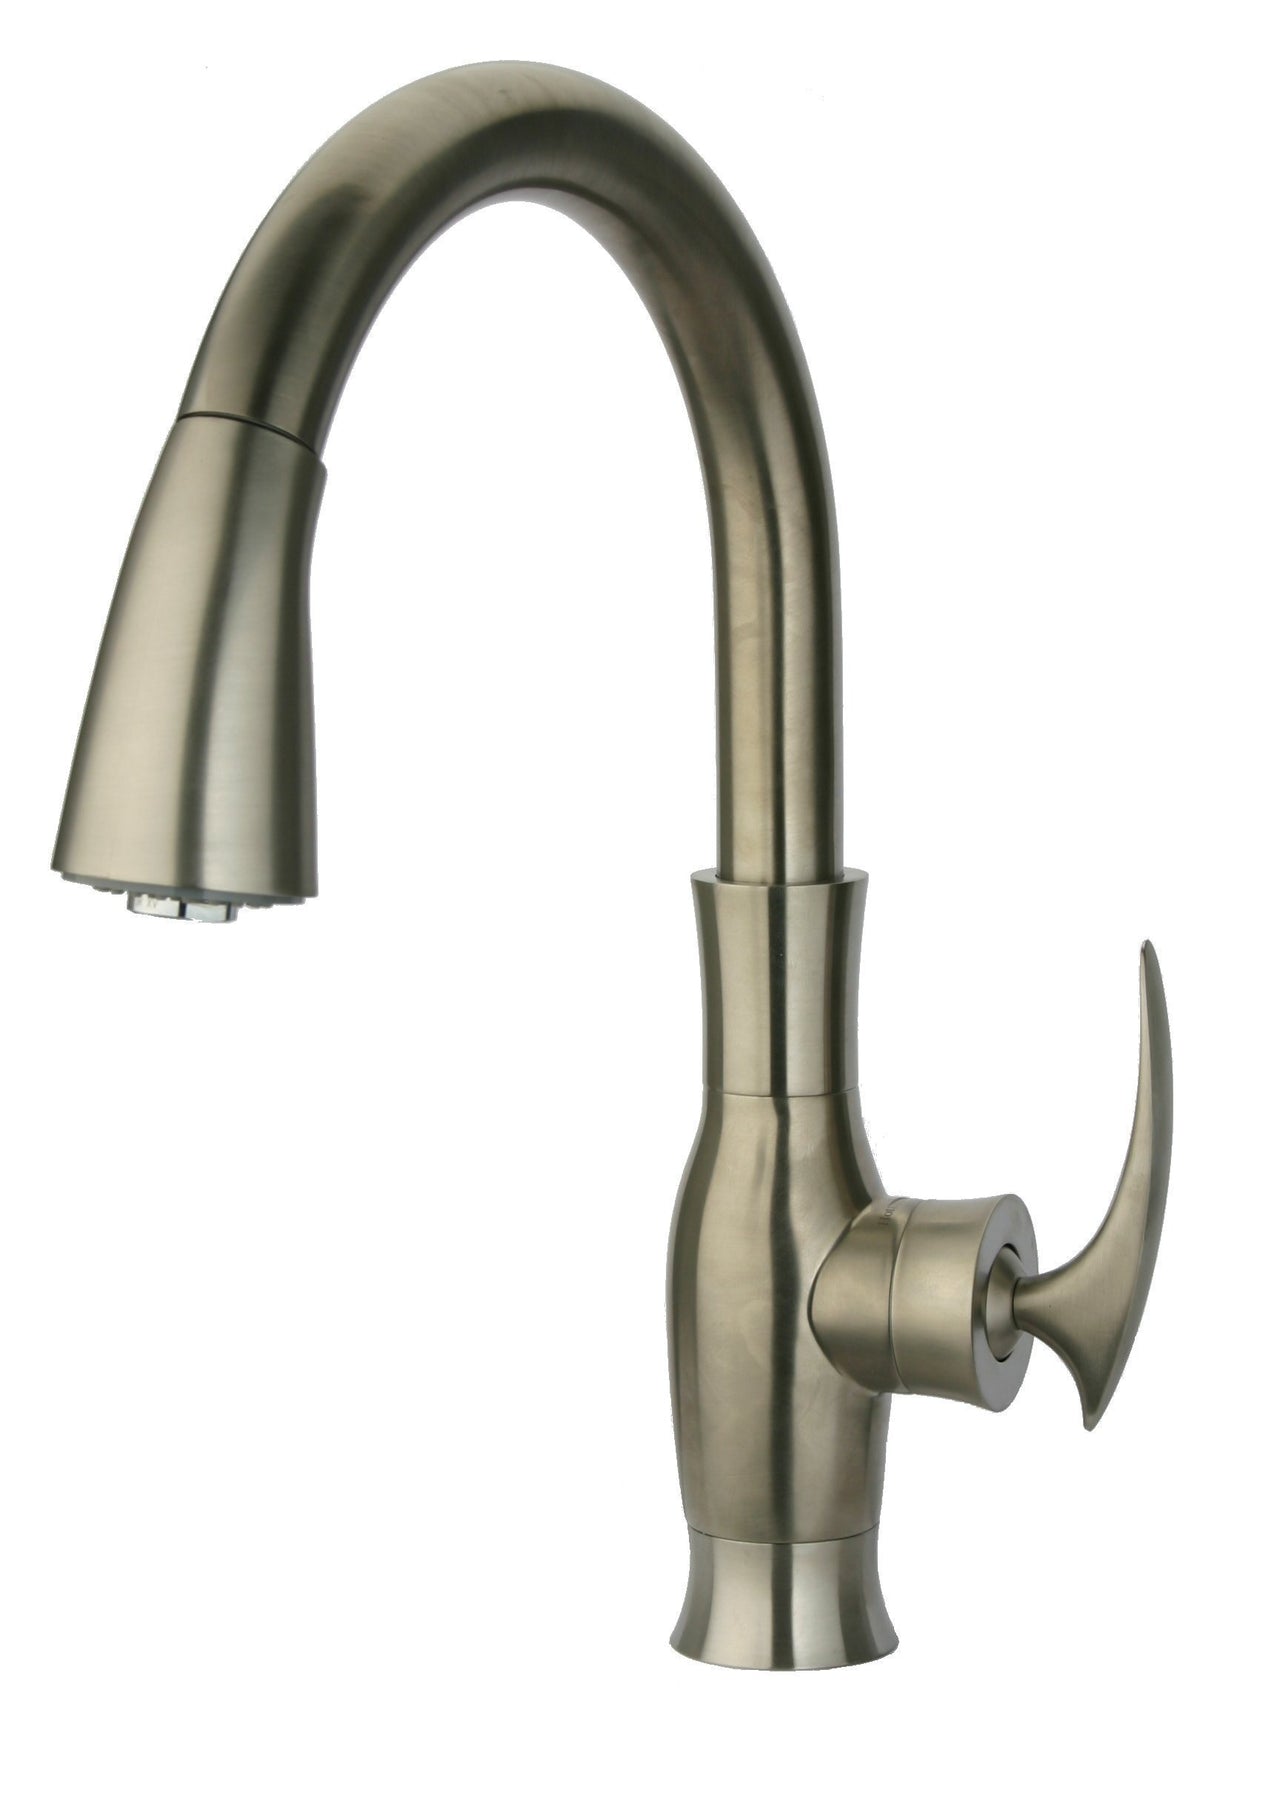 Latoscana Firenze Single Handle Pull-Down Spray Kitchen Faucet In Brushed Nickel Finish Kitchen faucet Latoscana 